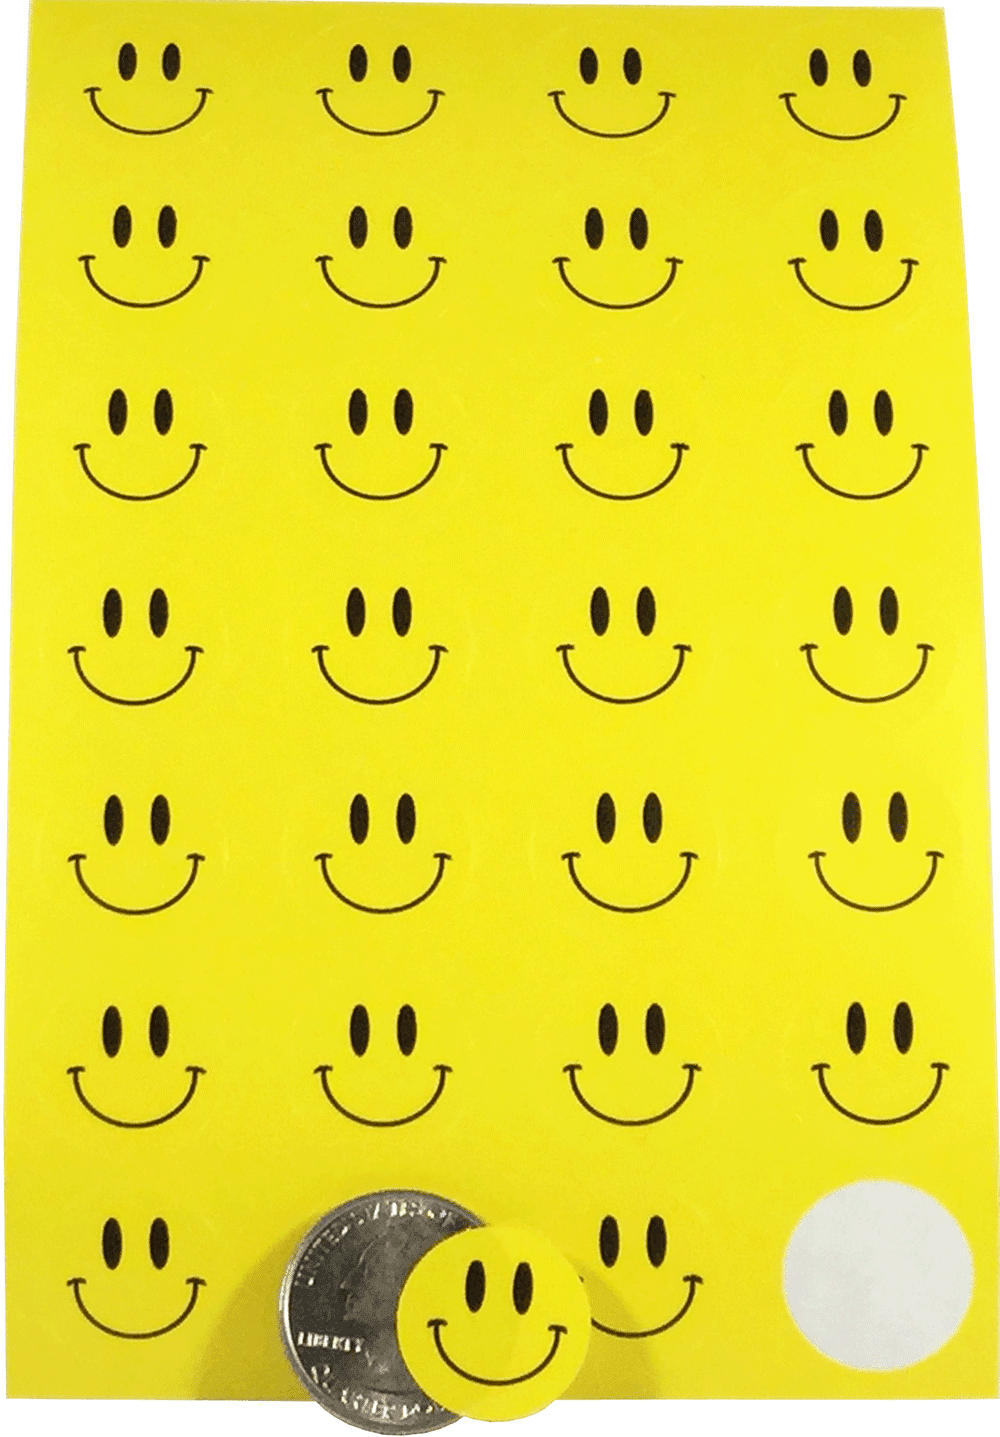 YELLOW SMILEY FACE YELLOW SMILEY FACES BADGES 10 SMALL OR 3 LARGE ON CARD 